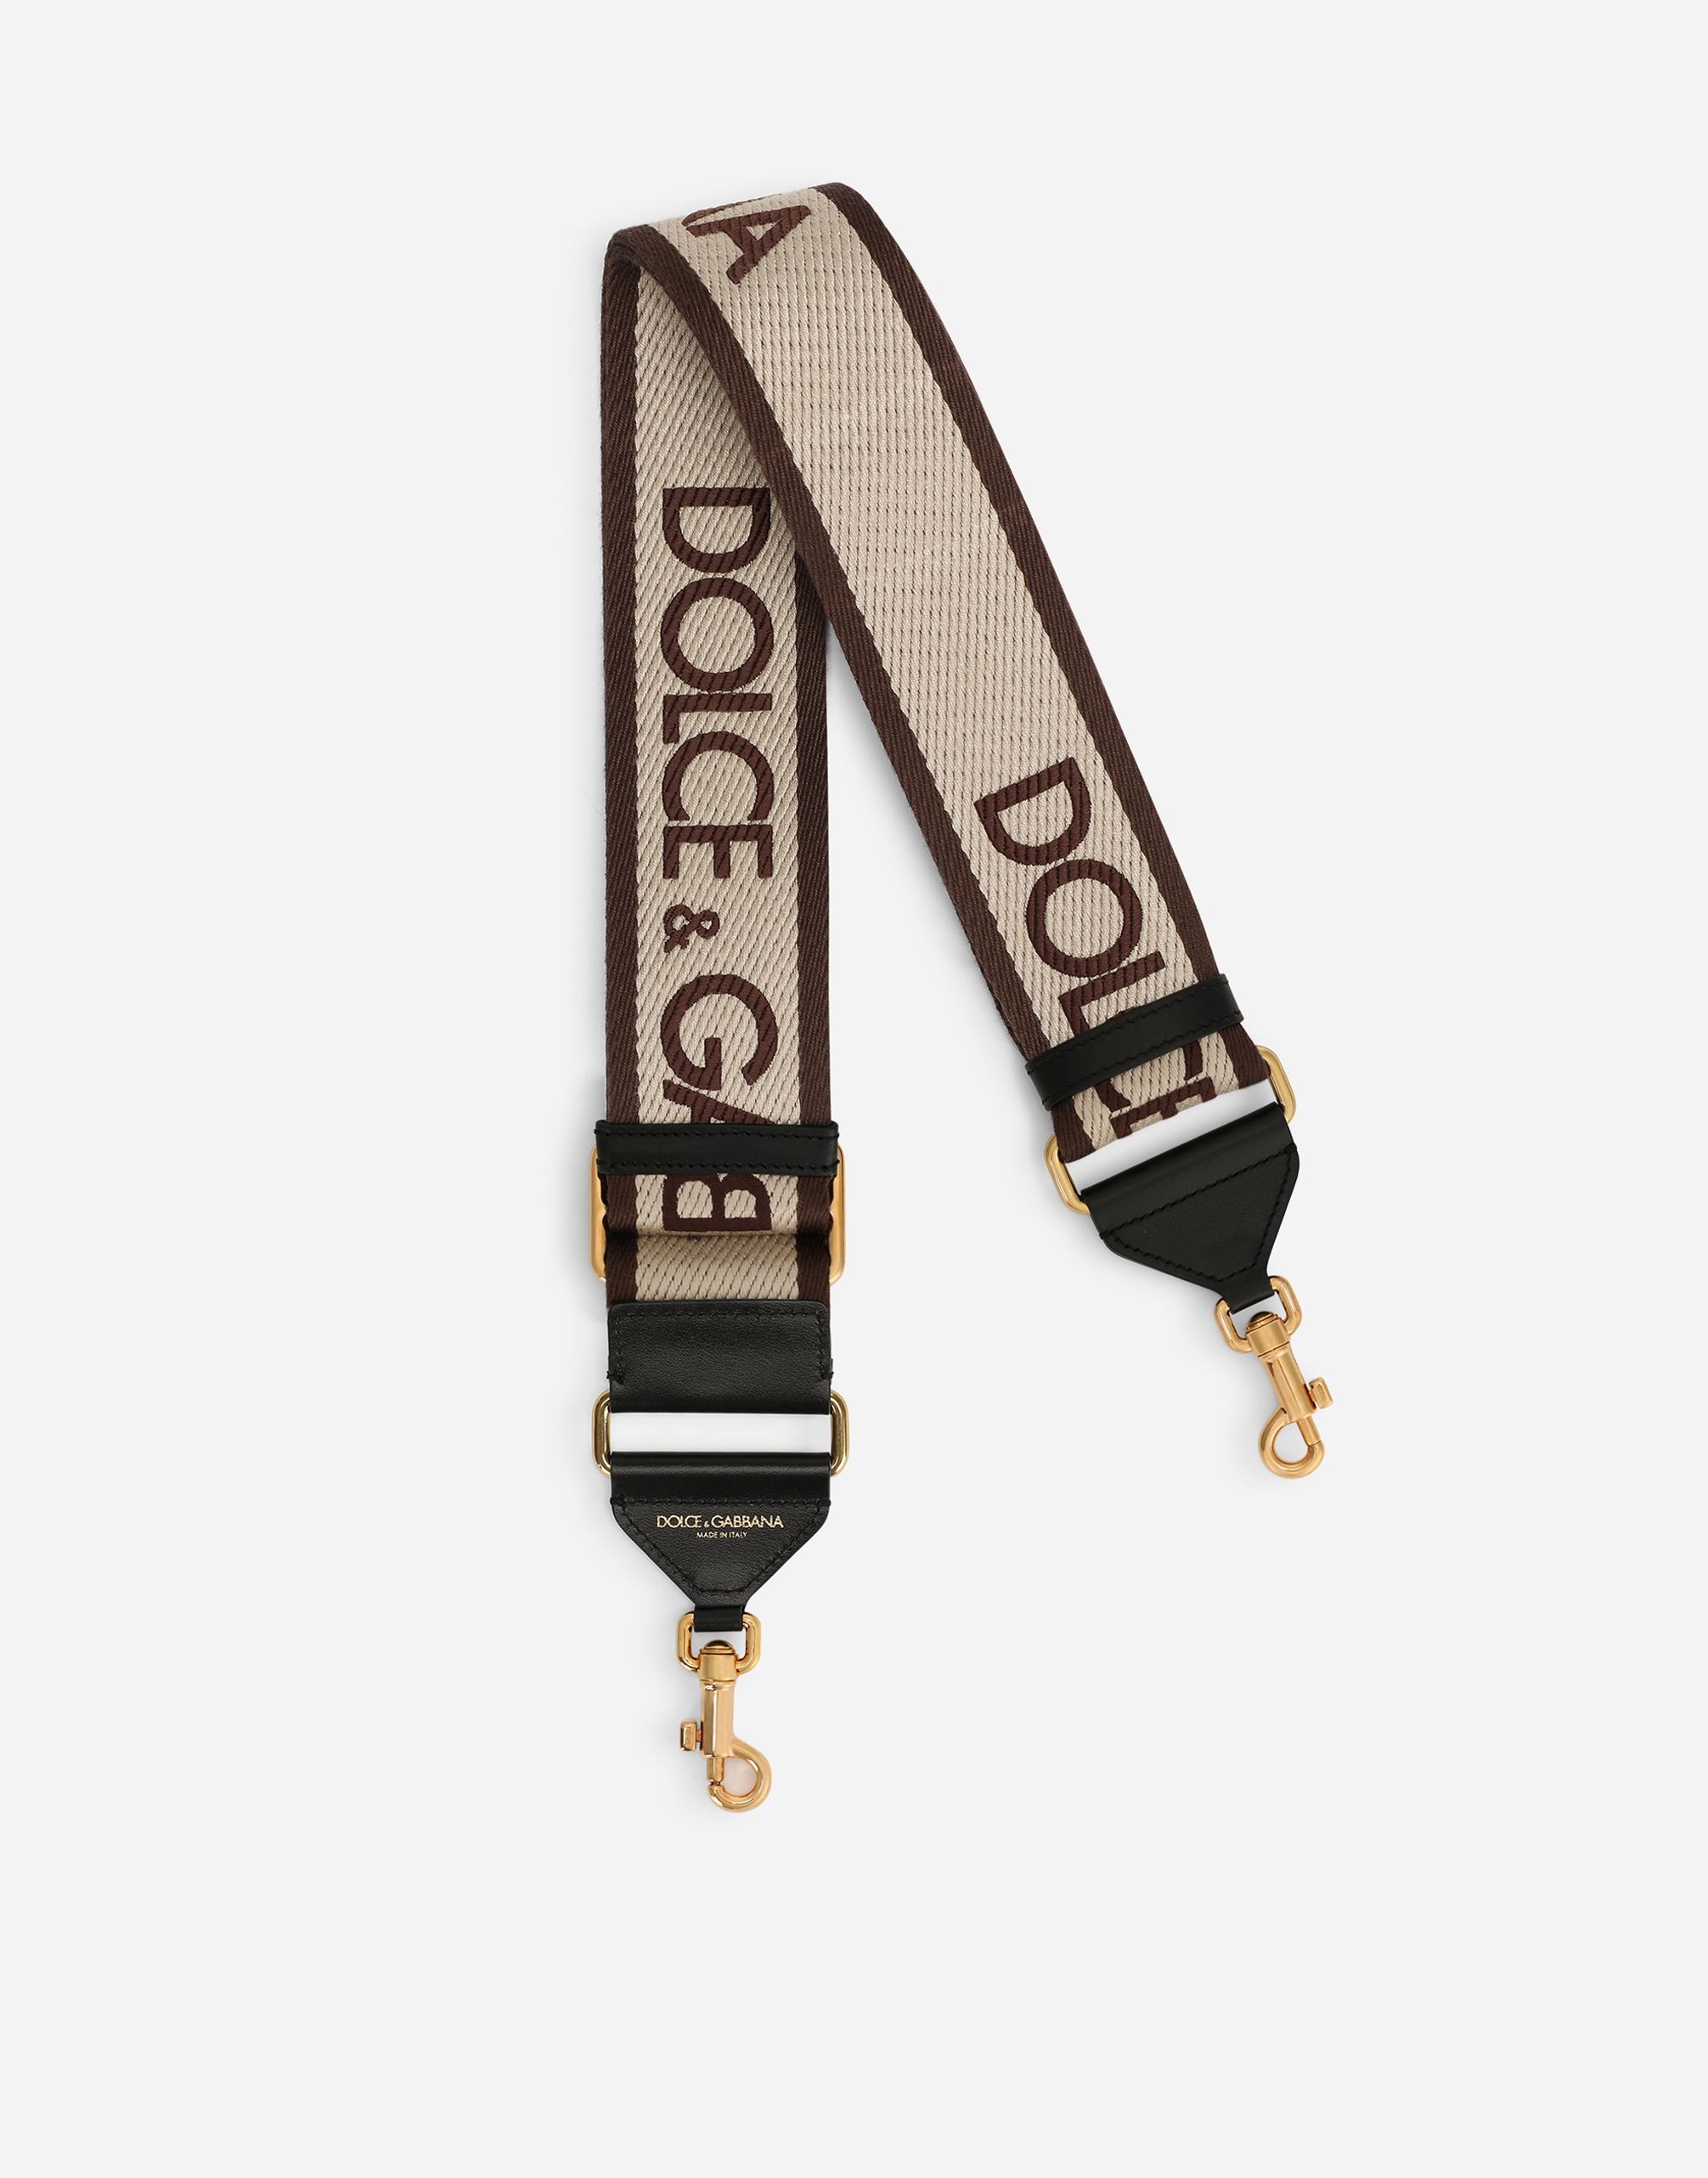 Branded fabric and leather strap in Beige